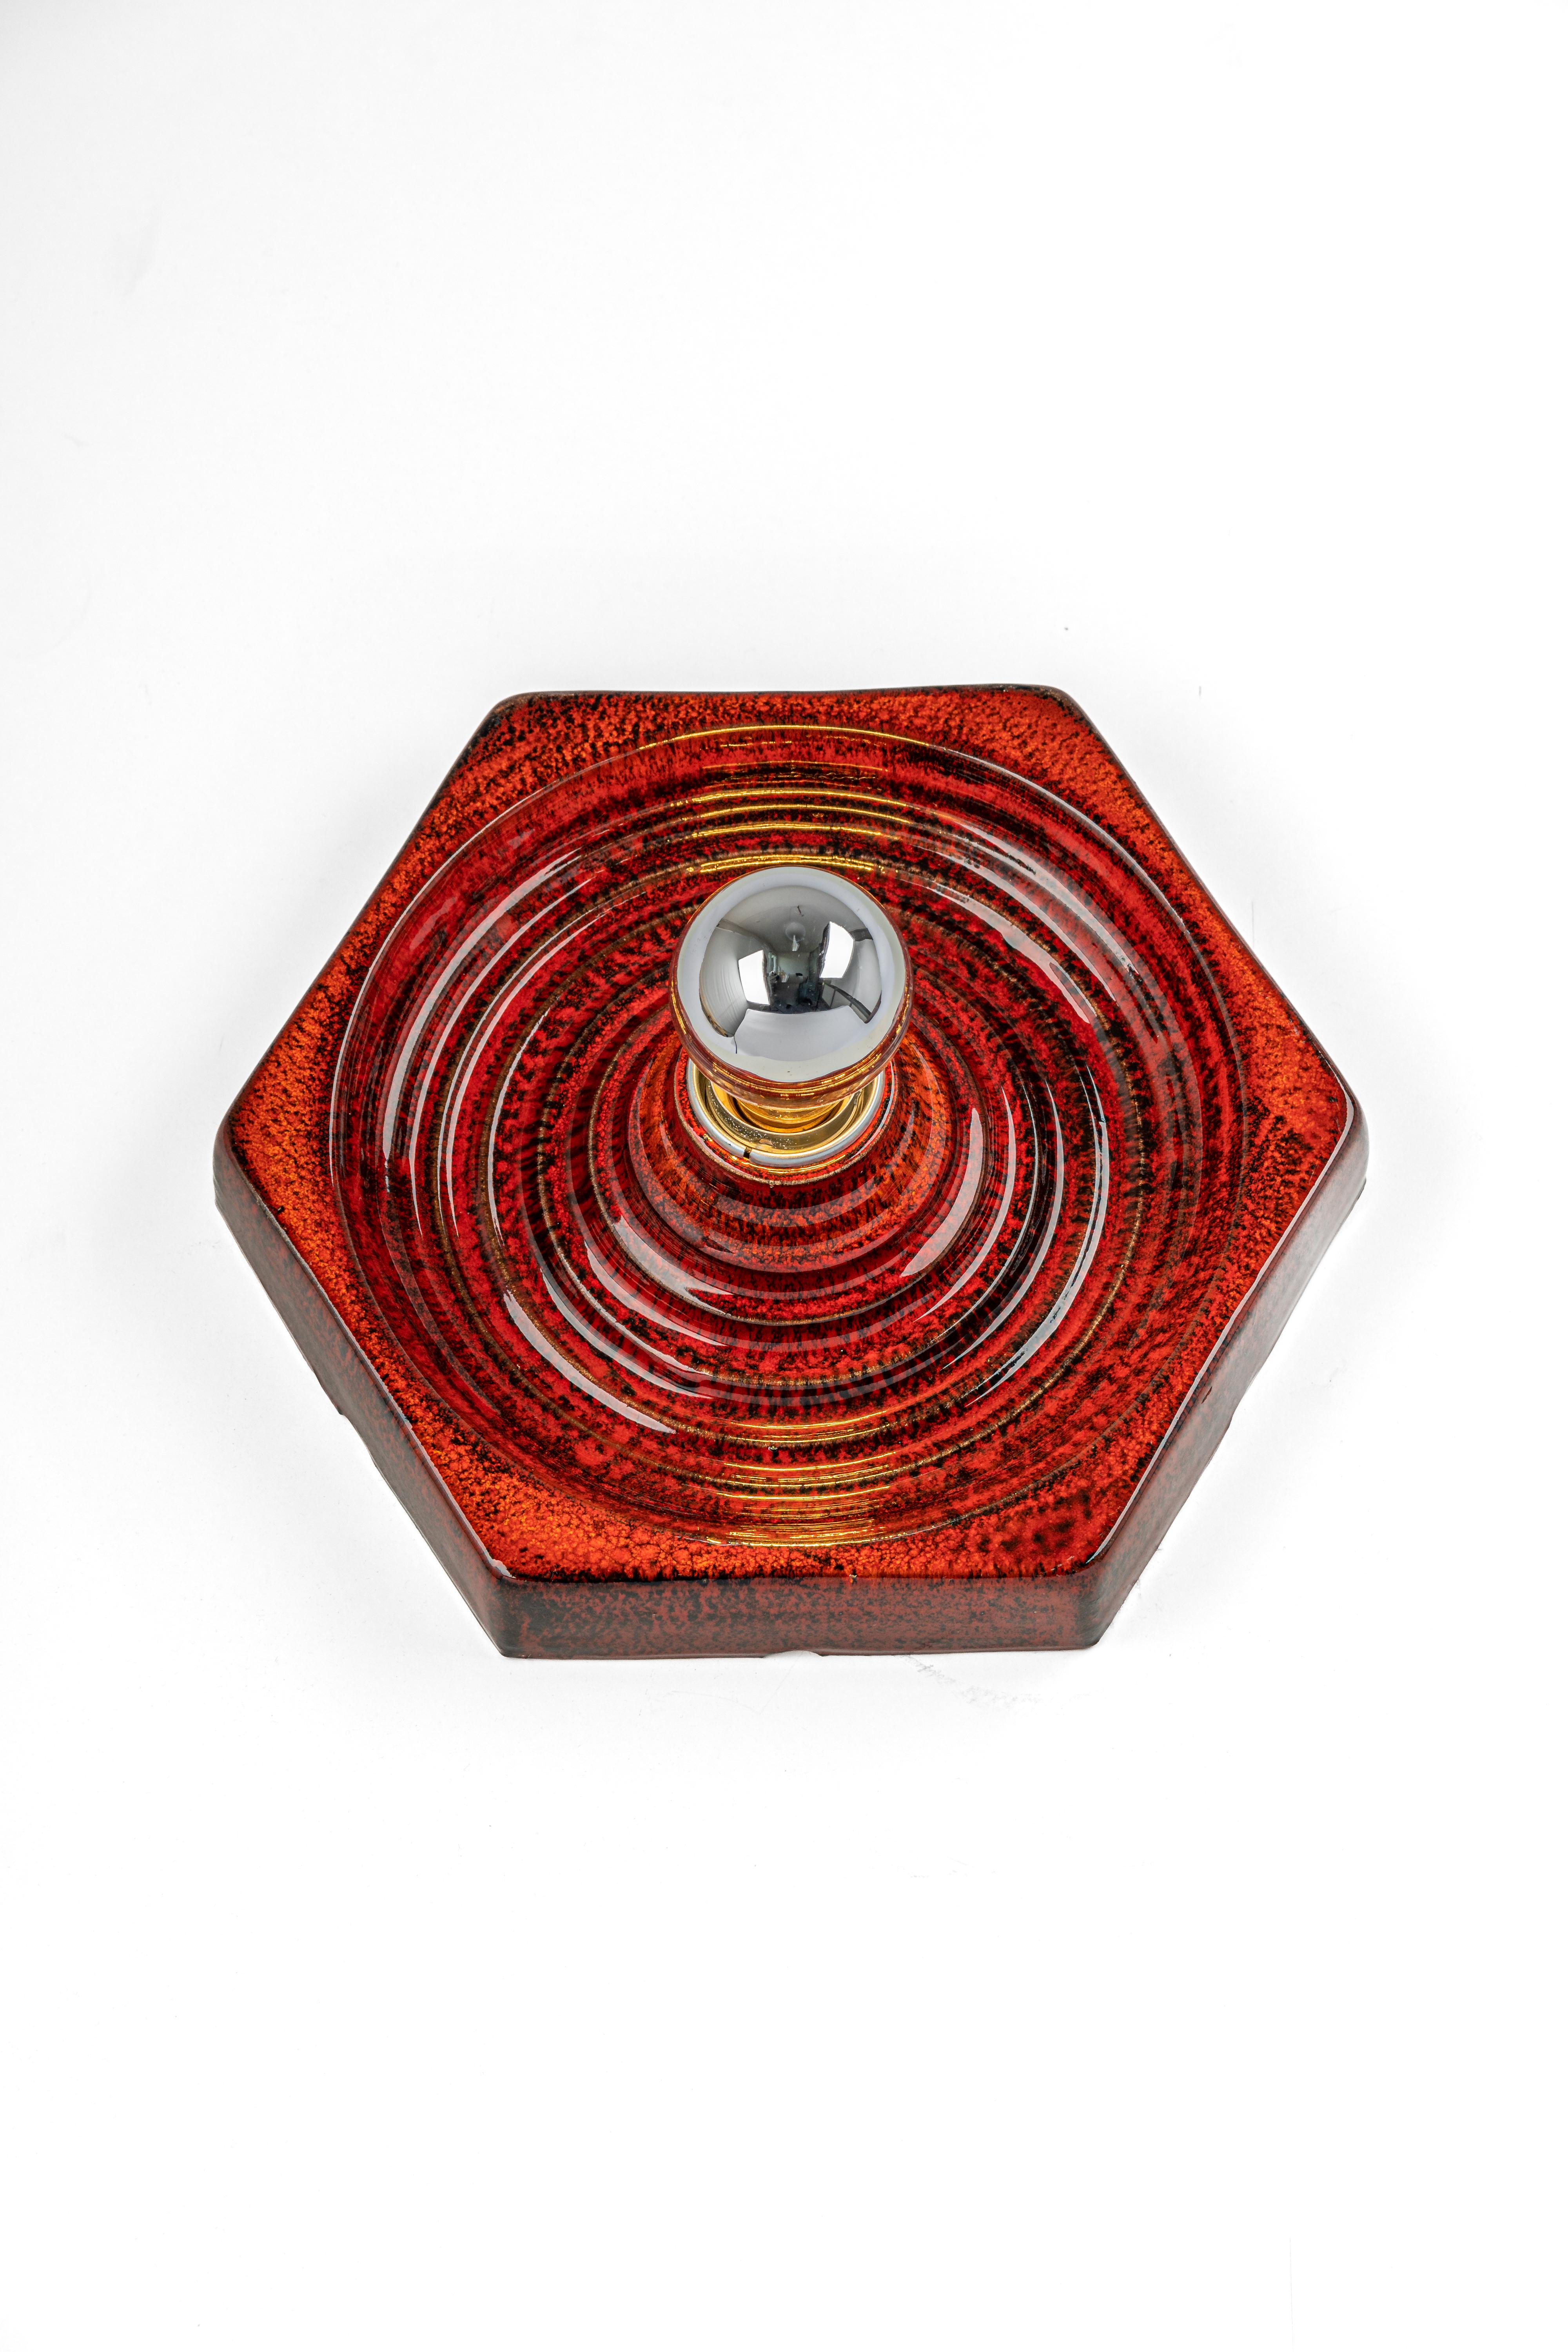 1 of 8 Ceramic Red and Orange Wall Lights, Germany, 1970s For Sale 2